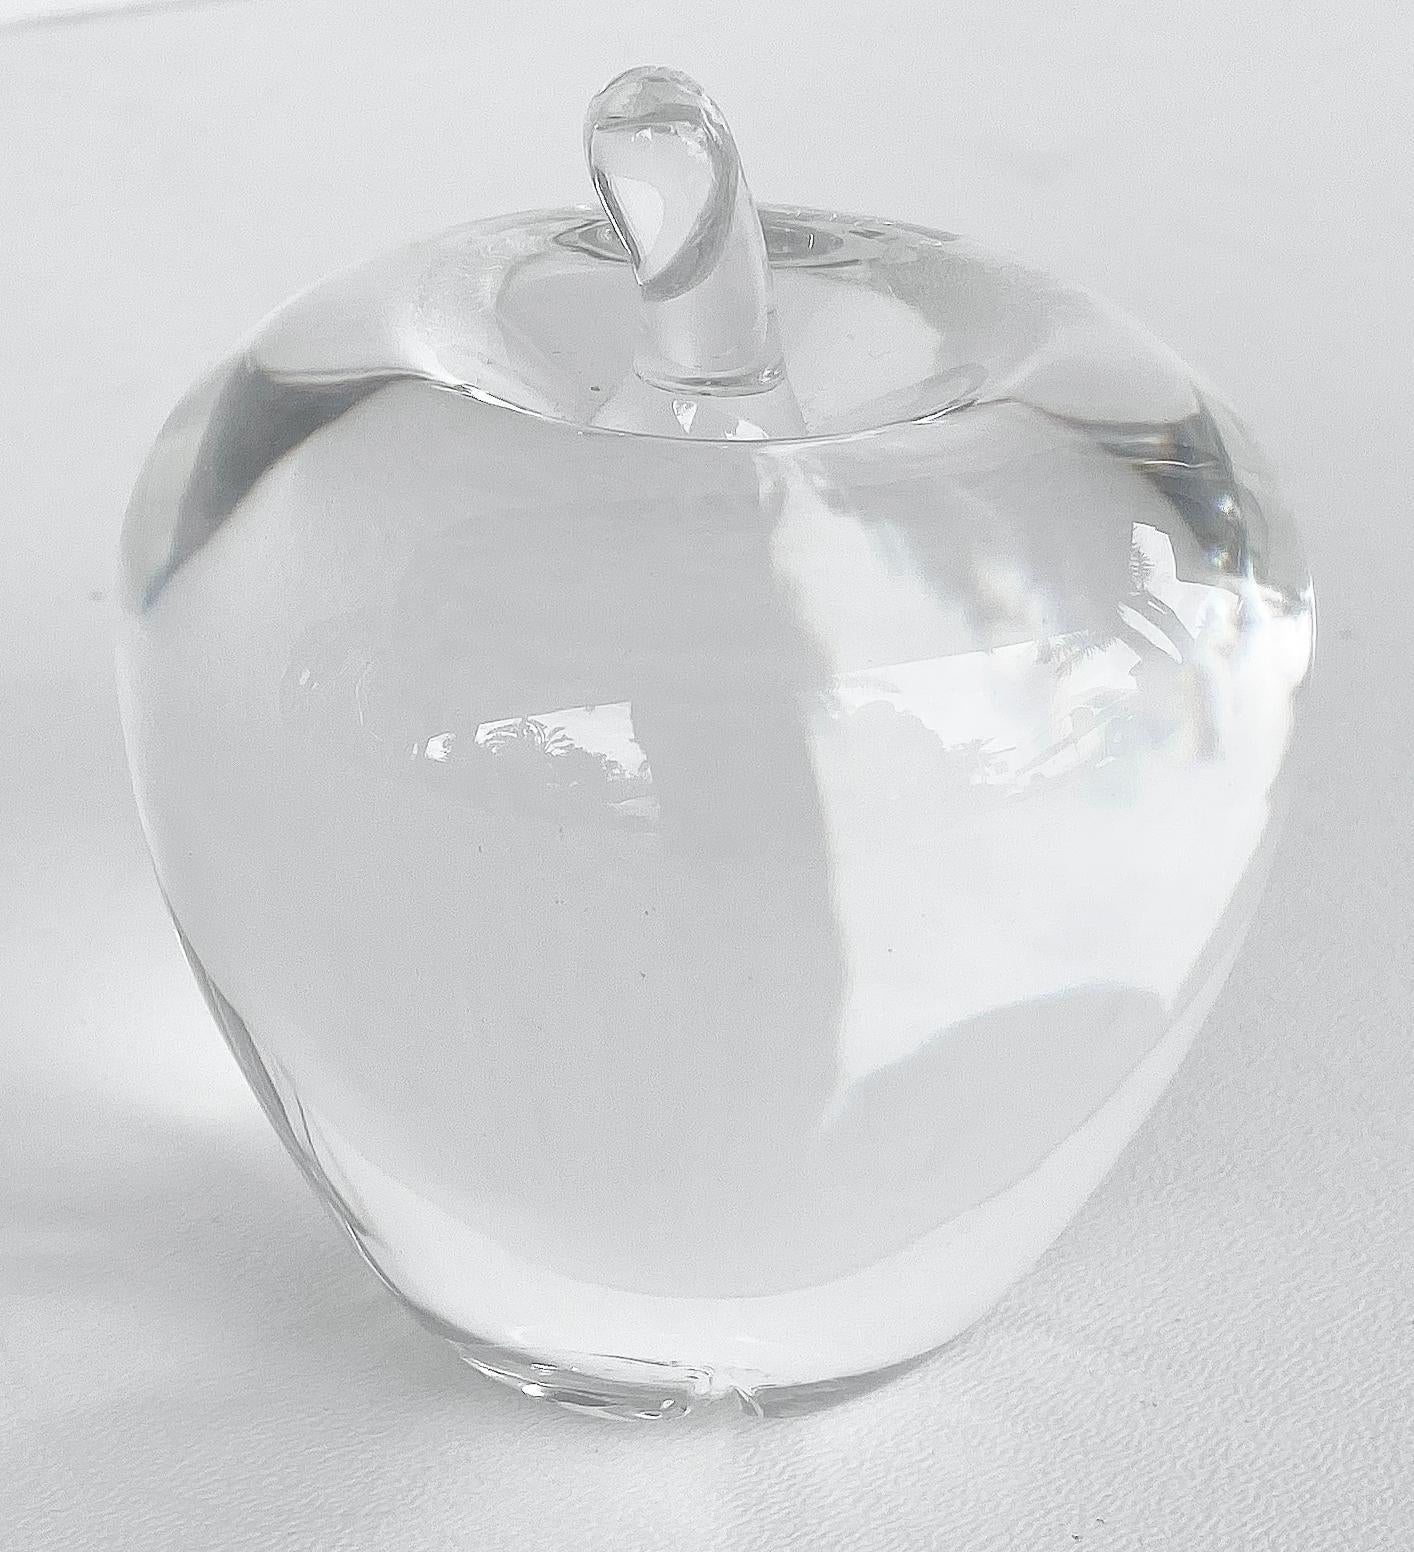 Vintage Steuben glass apple paperweight

Offered for sale is a Steuben Glass Apple Paperweight. Steuben is an American fine glass and crystal brand, which makes the highest-quality decorative collectibles and luxury housewares. The company was